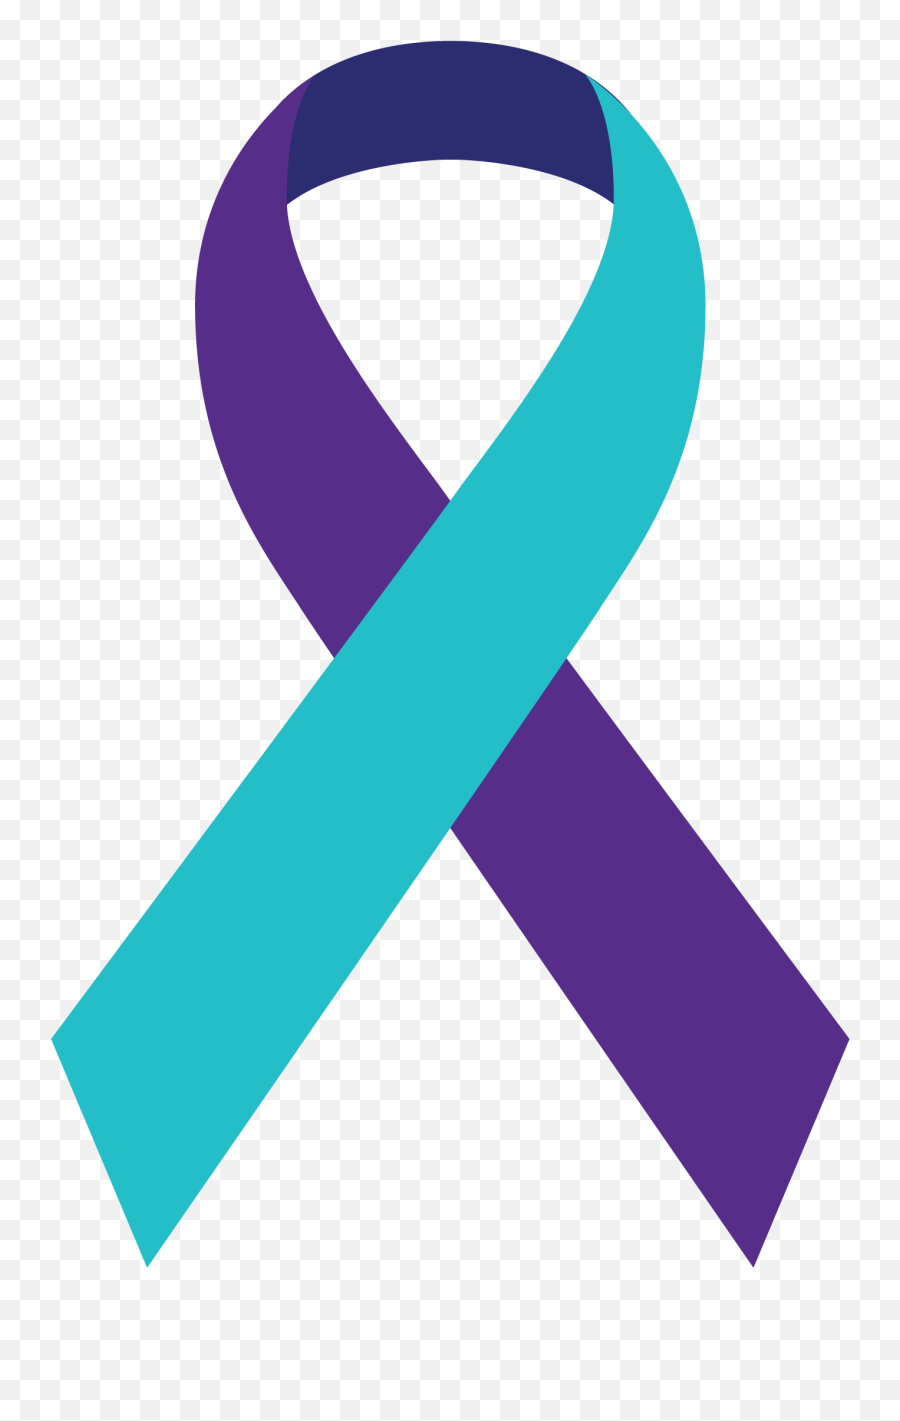 Tragedy Sparks Suicide Awareness - Suicide Awareness Ribbon Emoji,Is There An Emoticon For Suicide